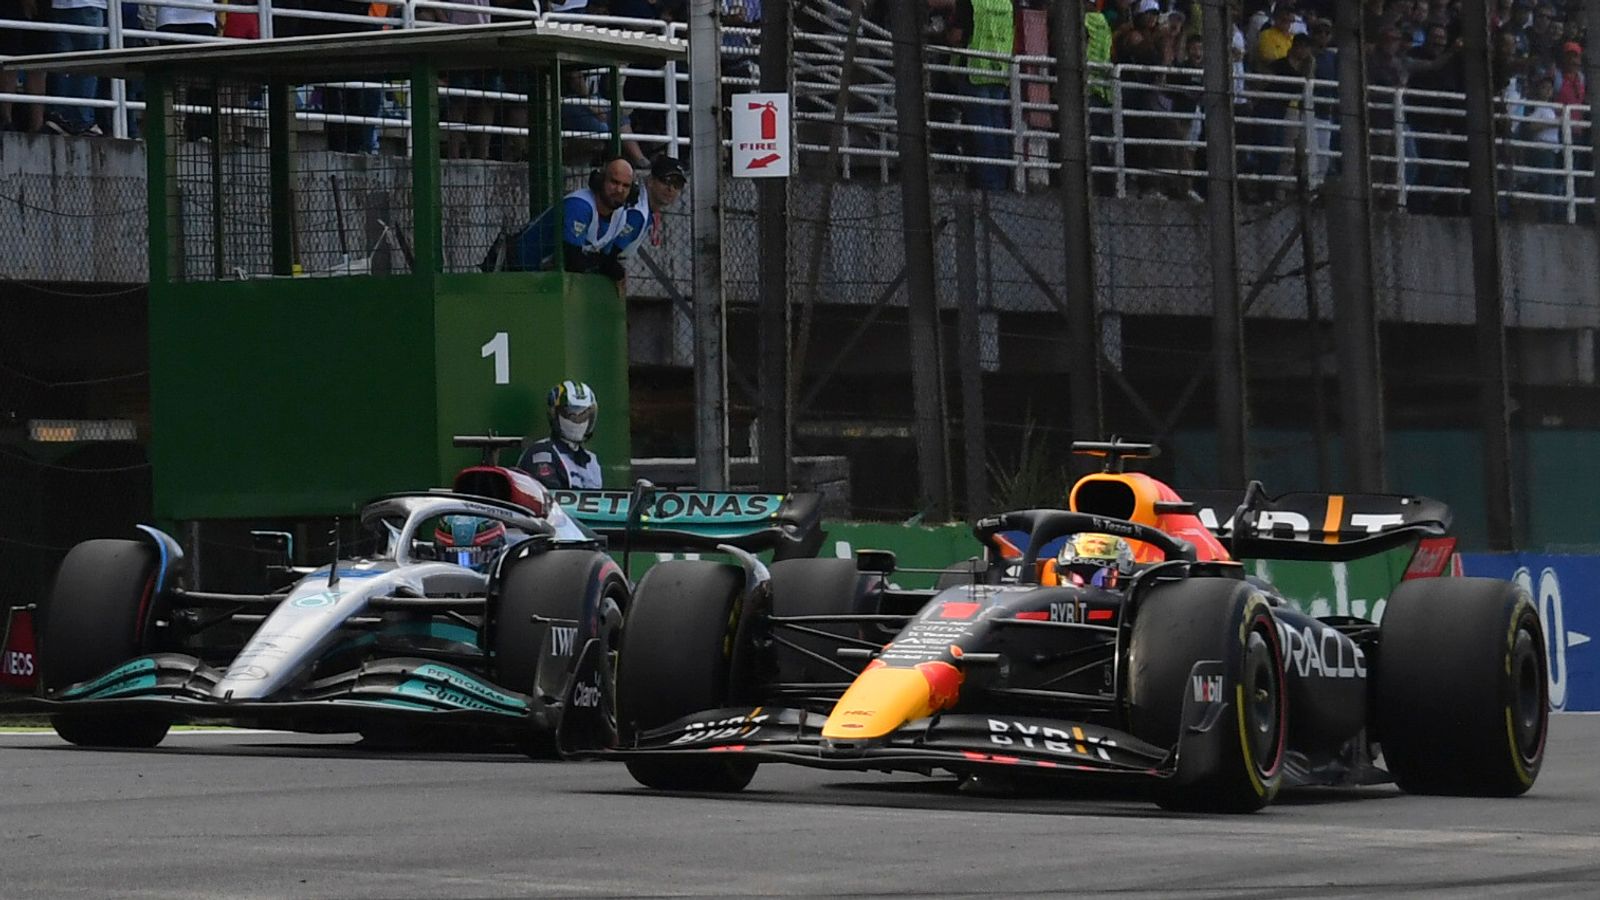 Sao Paulo GP: Red Bull admit Sprint strategy error for Max Verstappen, but Christian Horner has hopes for race